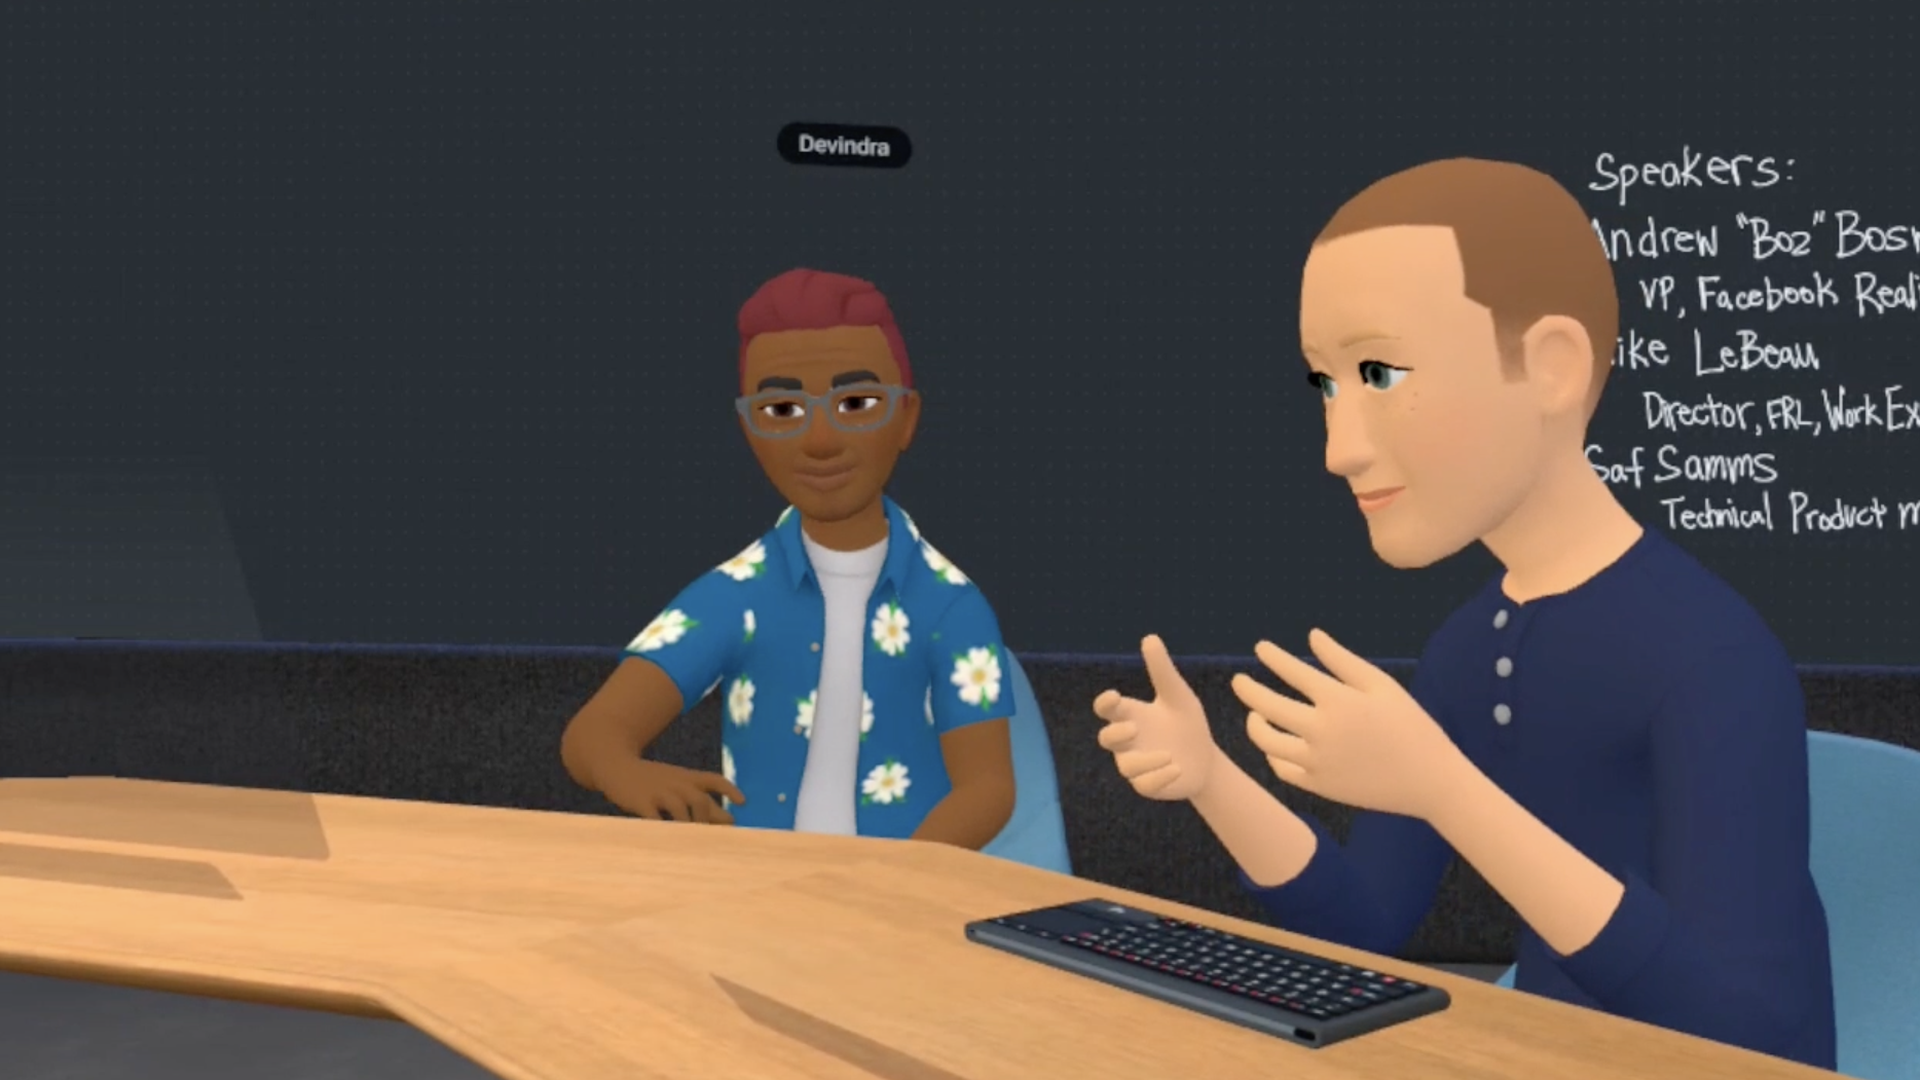 Screen shot of a meeting held in virtual reality, led by Facebook's Mark Zuckerberg